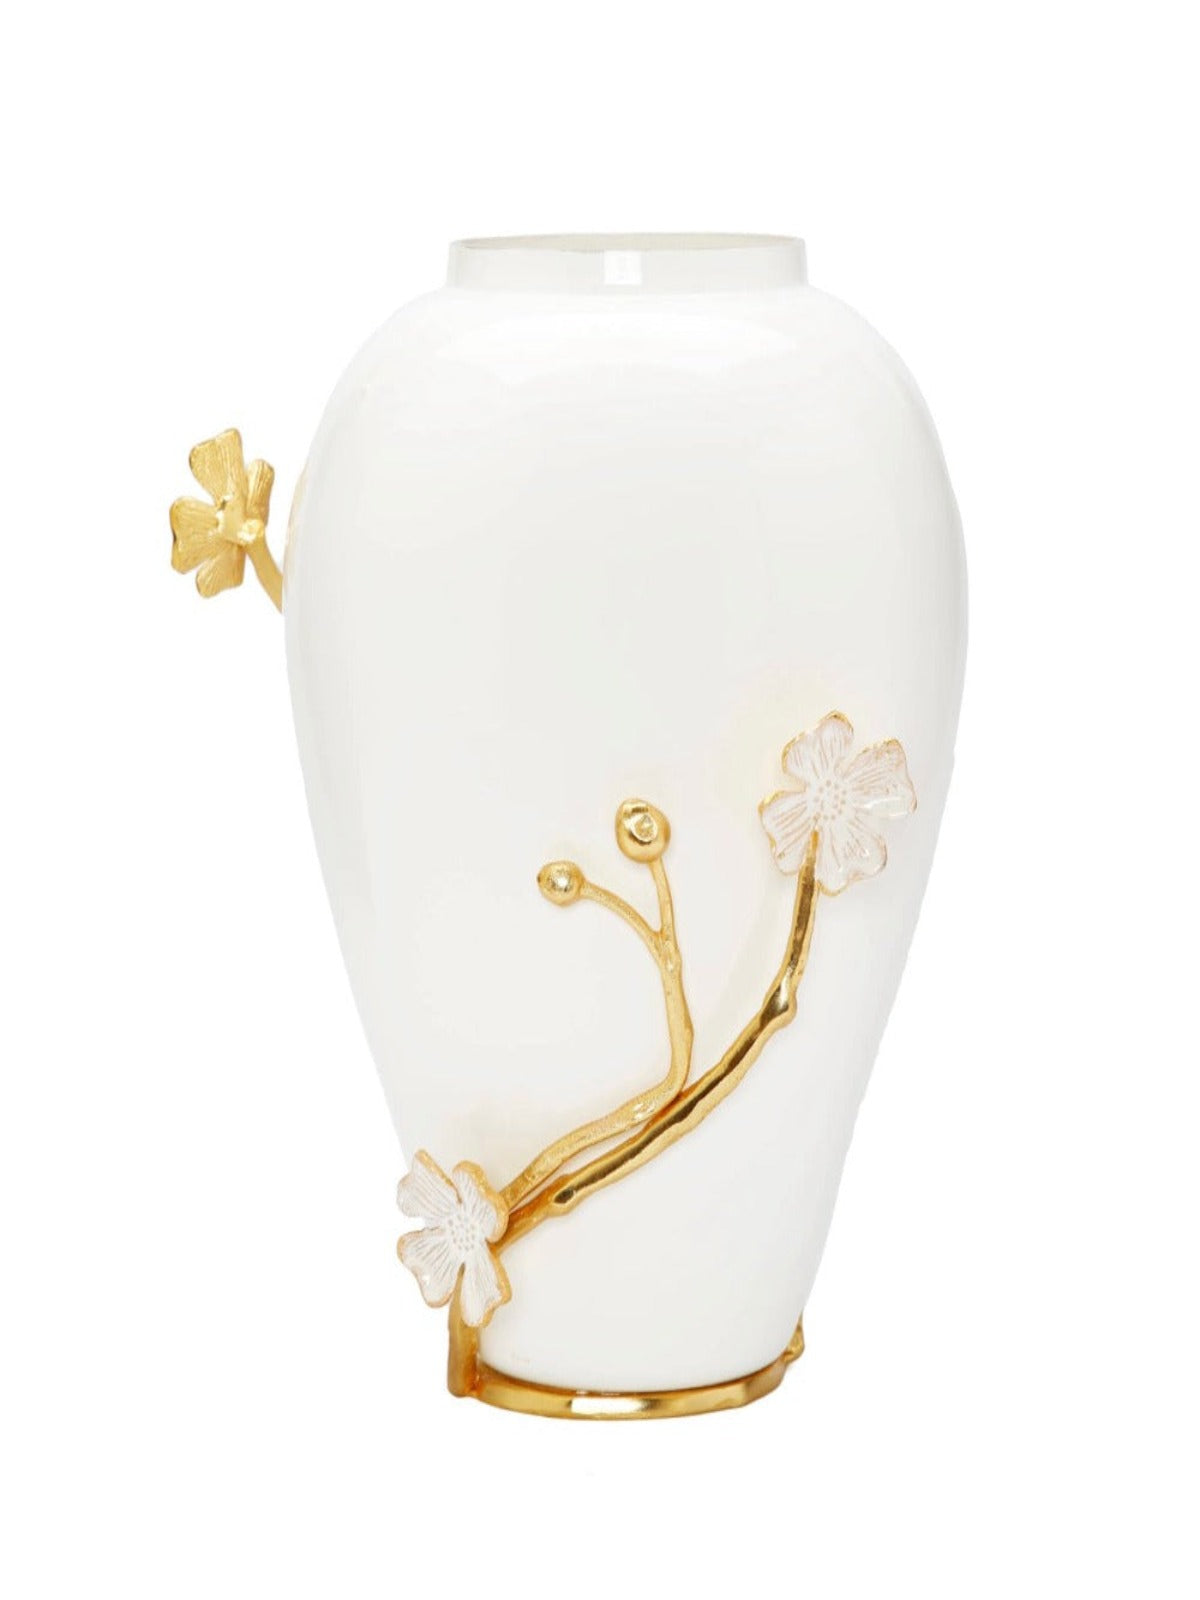 11H Cherry Blossom White Porcelain Vase with Luxurious Gold Branches - KYA Home Decor